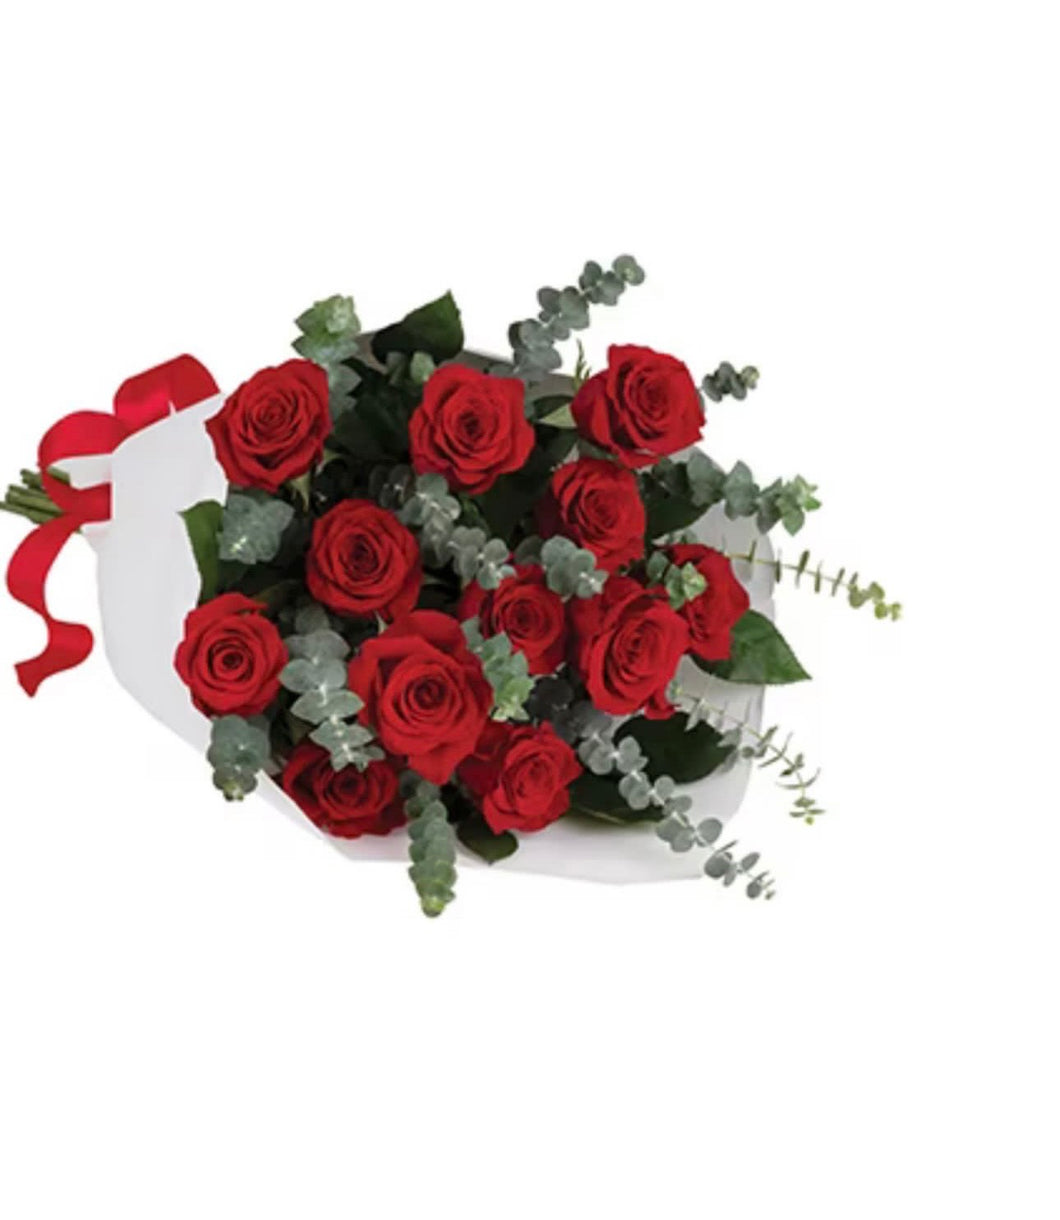 True Beauty - Red Roses Bouquet